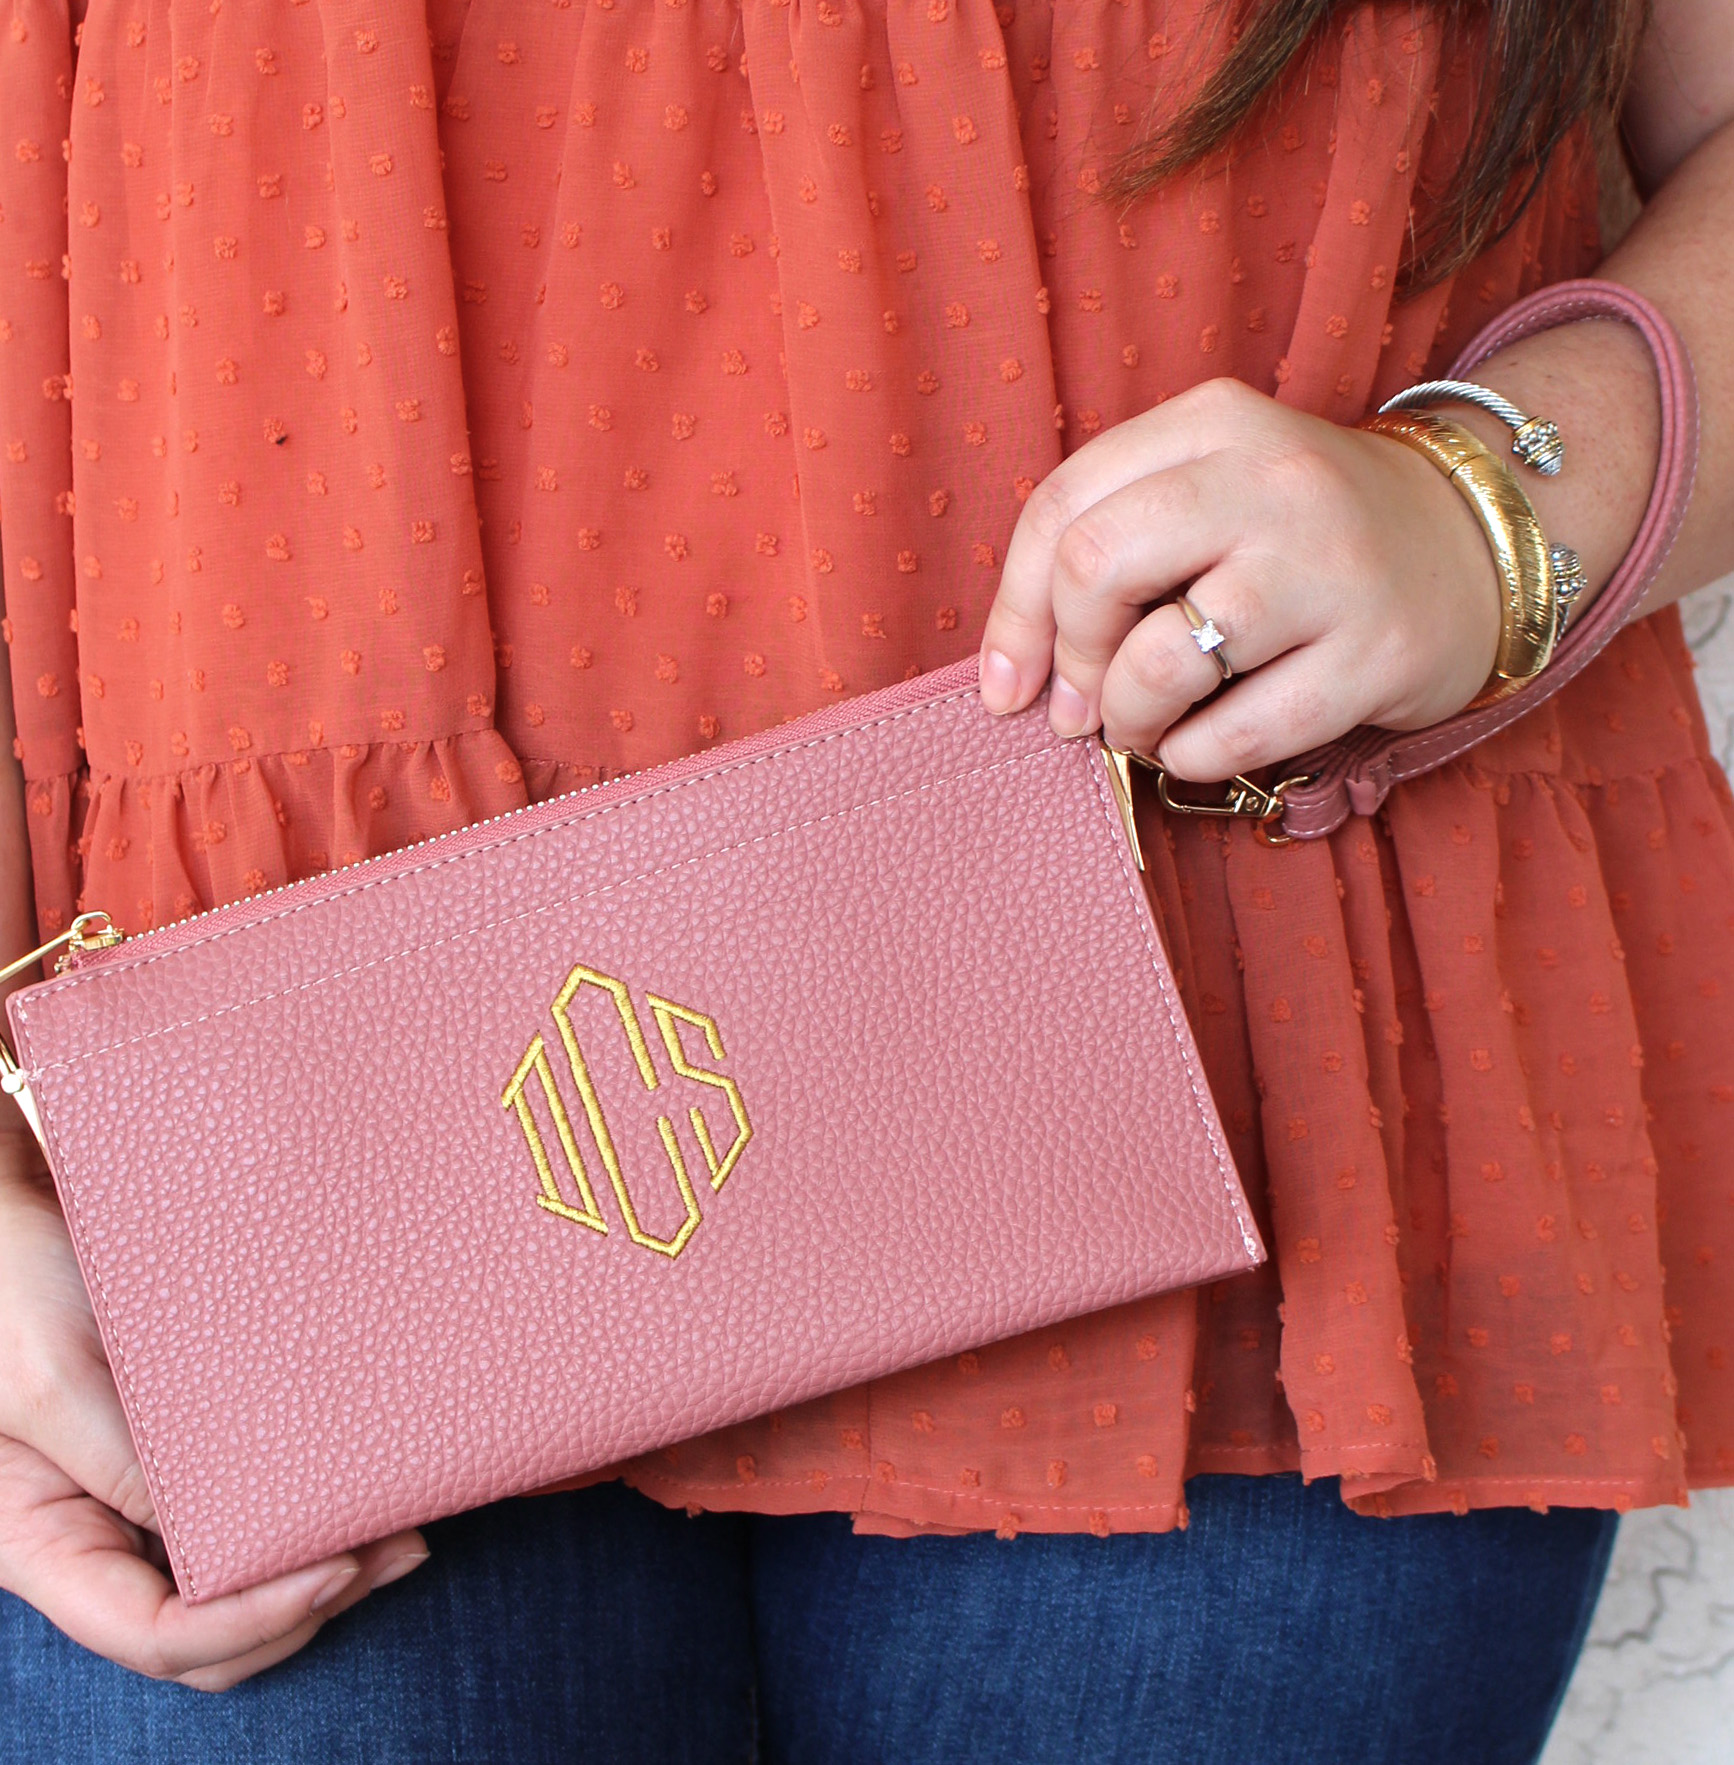 Simply Classic Wristlet - Monogram Me! - Best of Everything